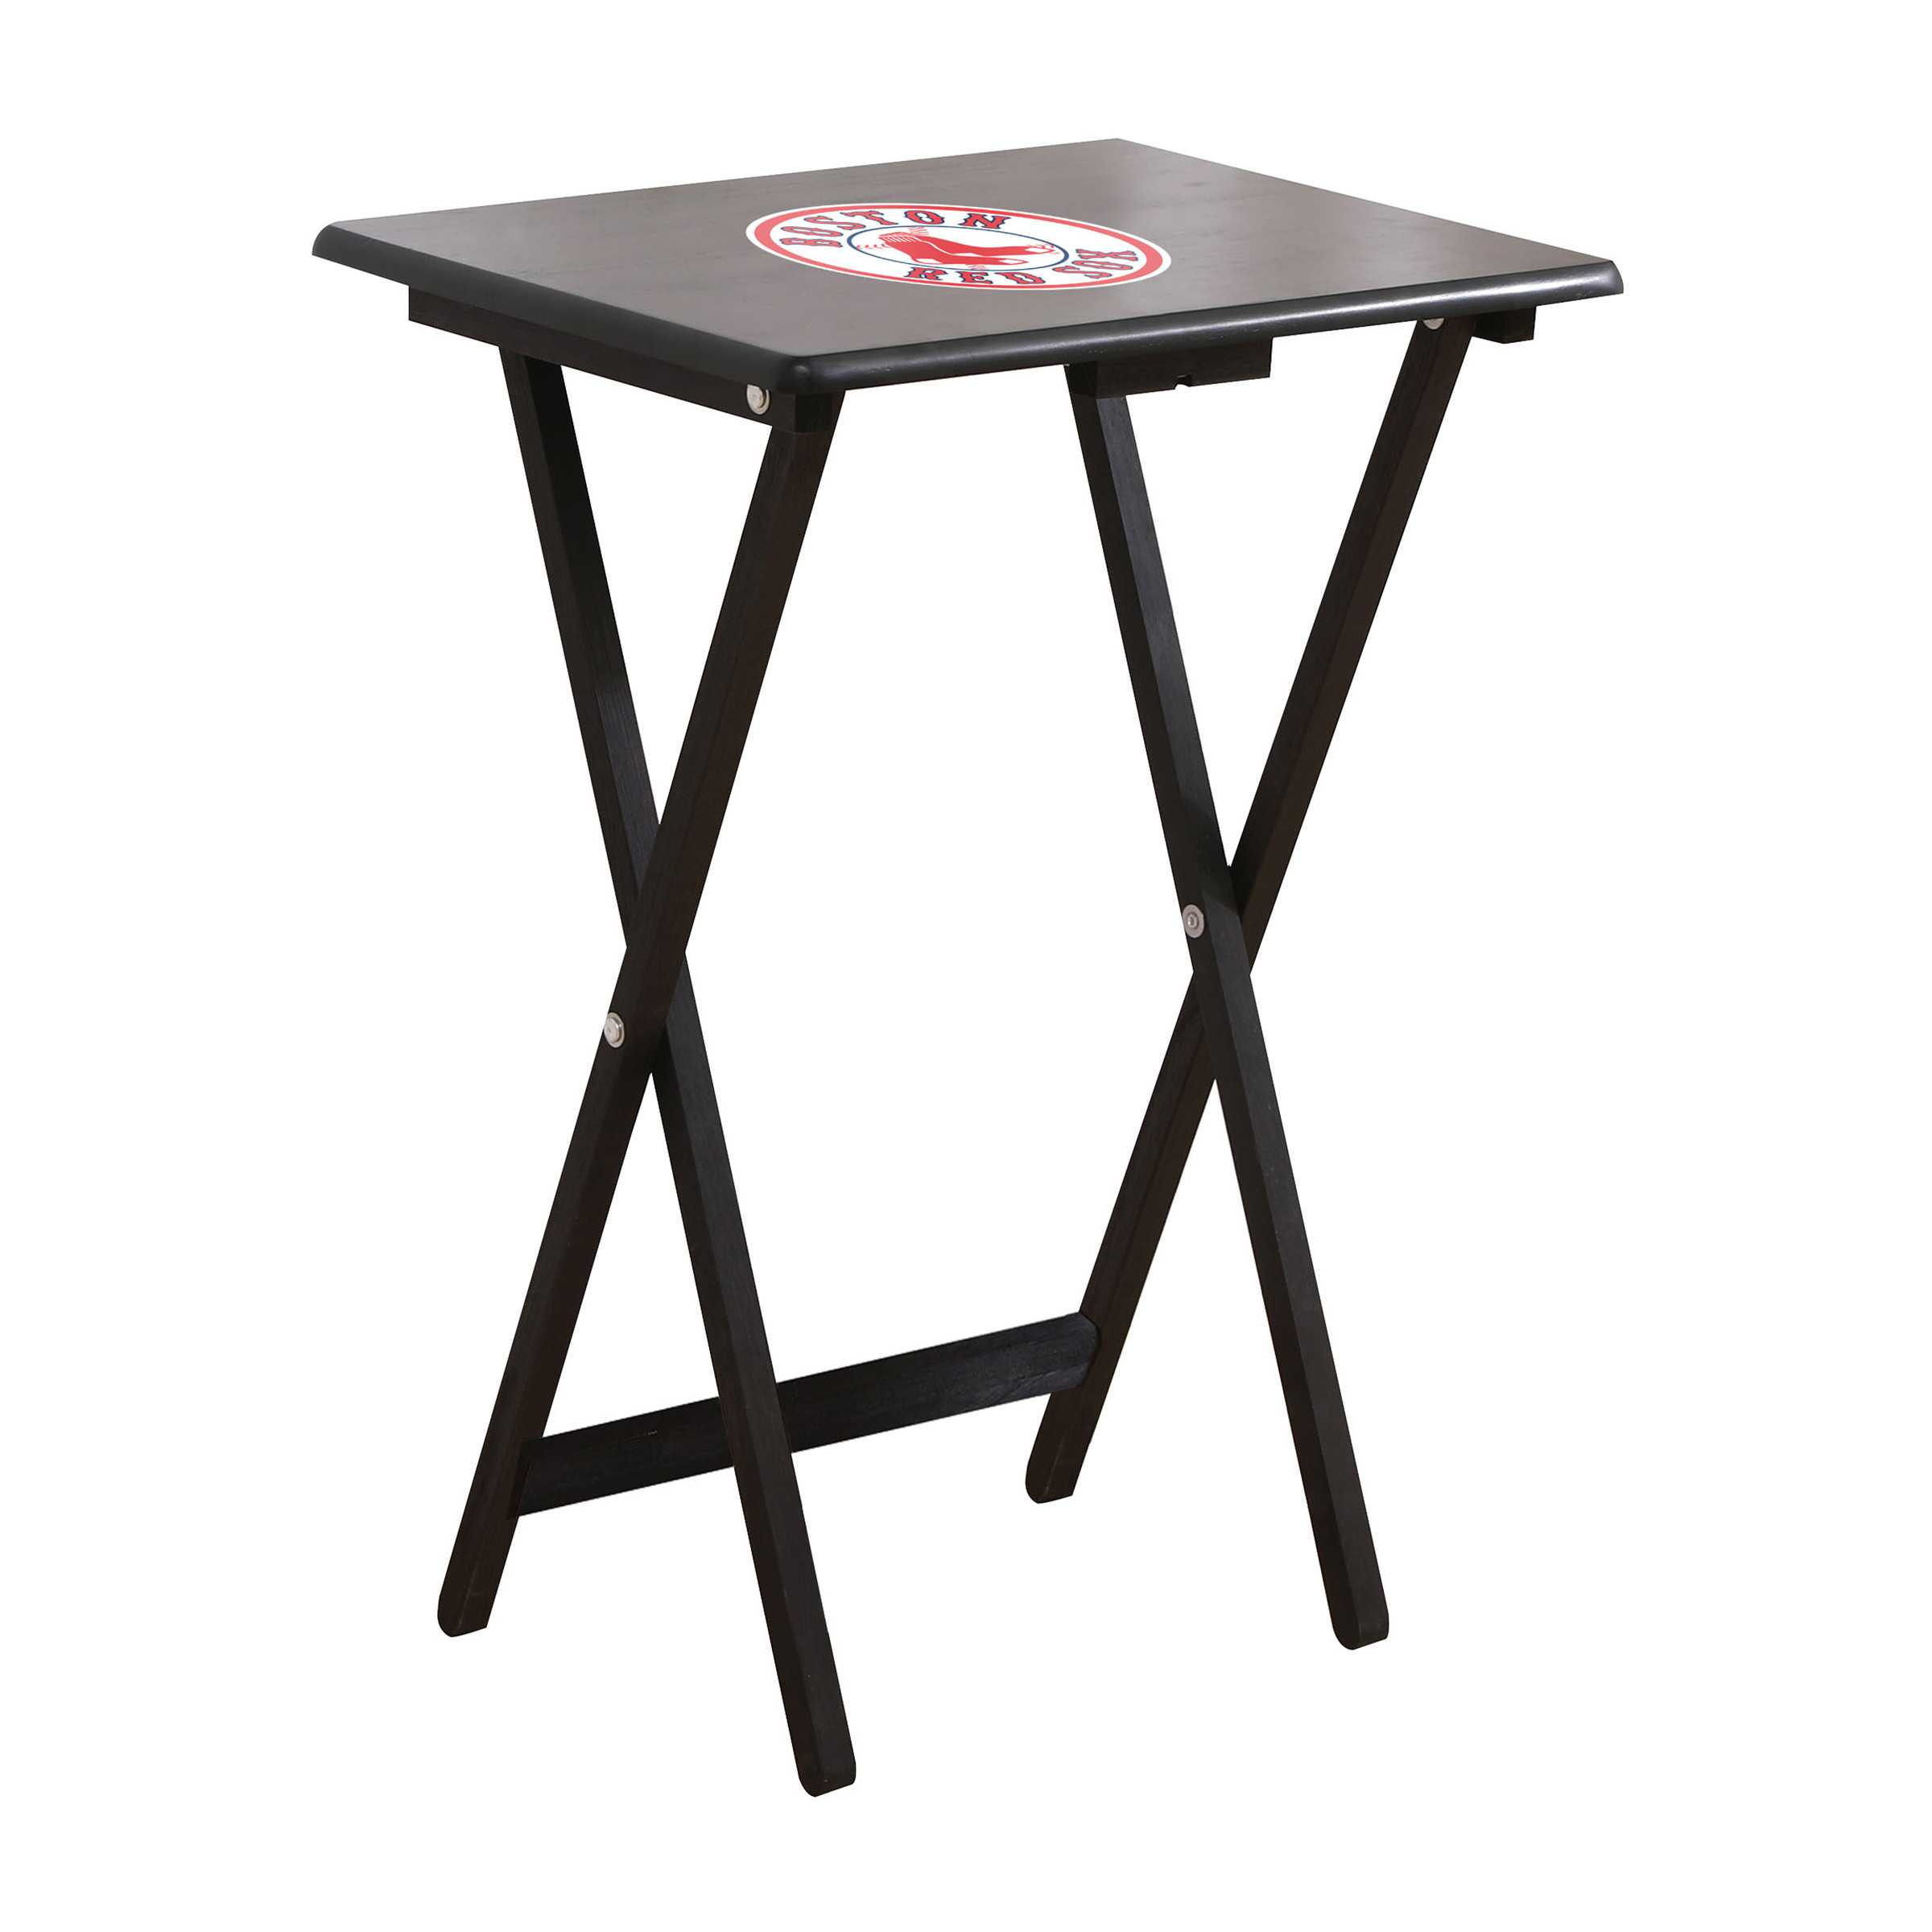 BOSTON RED SOX 4 TV TRAYS WITH STAND